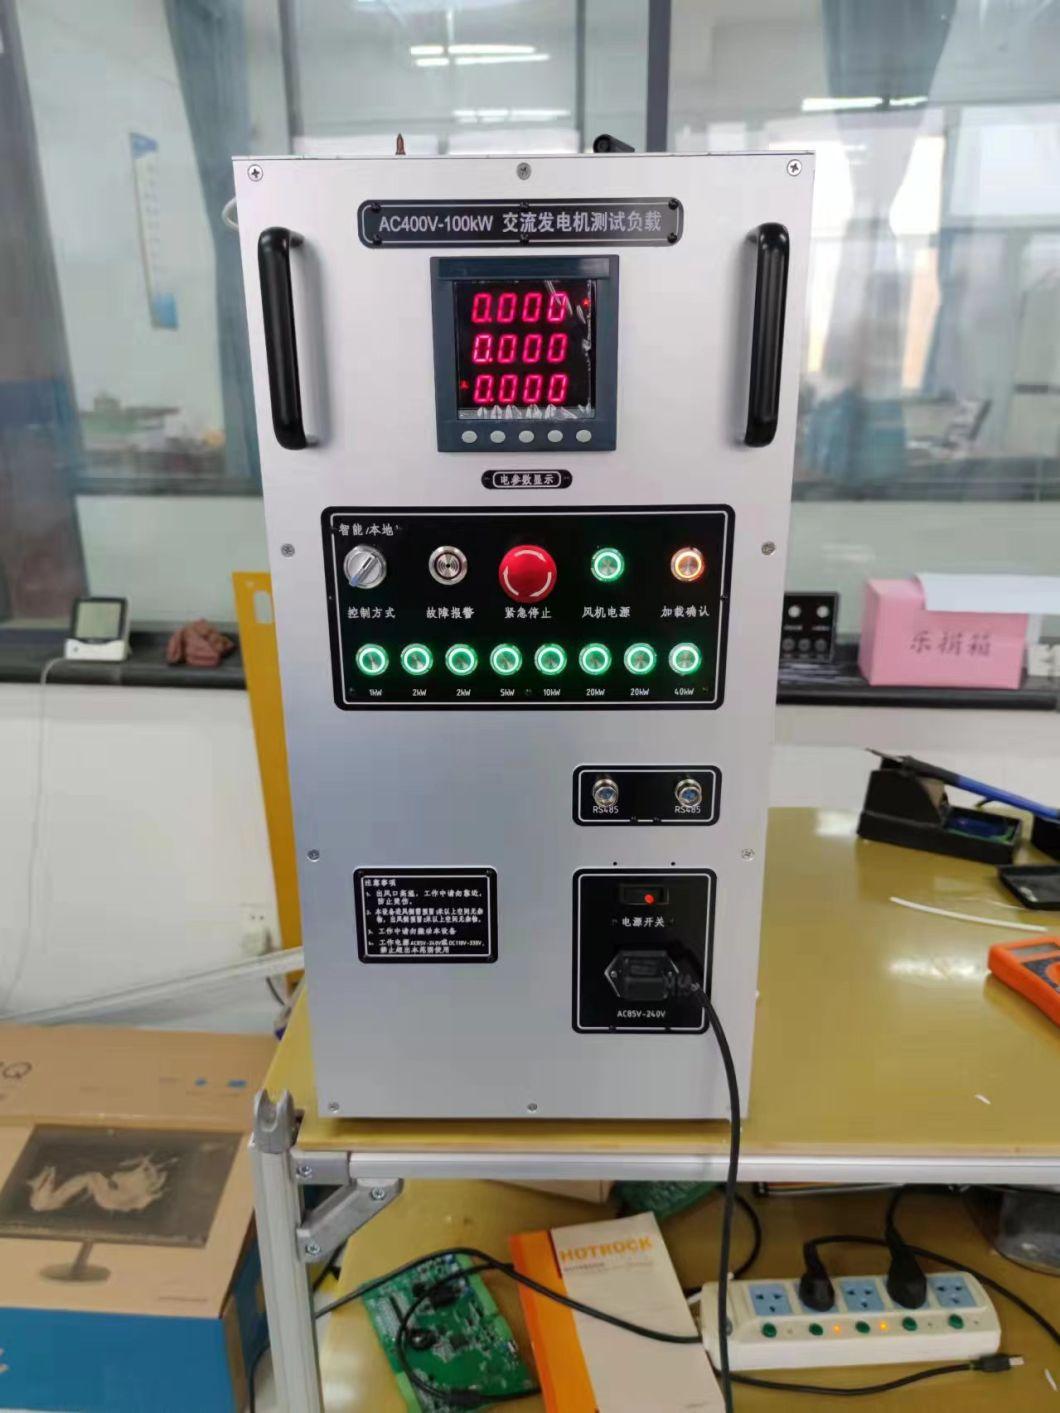 100kw Portable Resistive Load Bank for Generator Testing